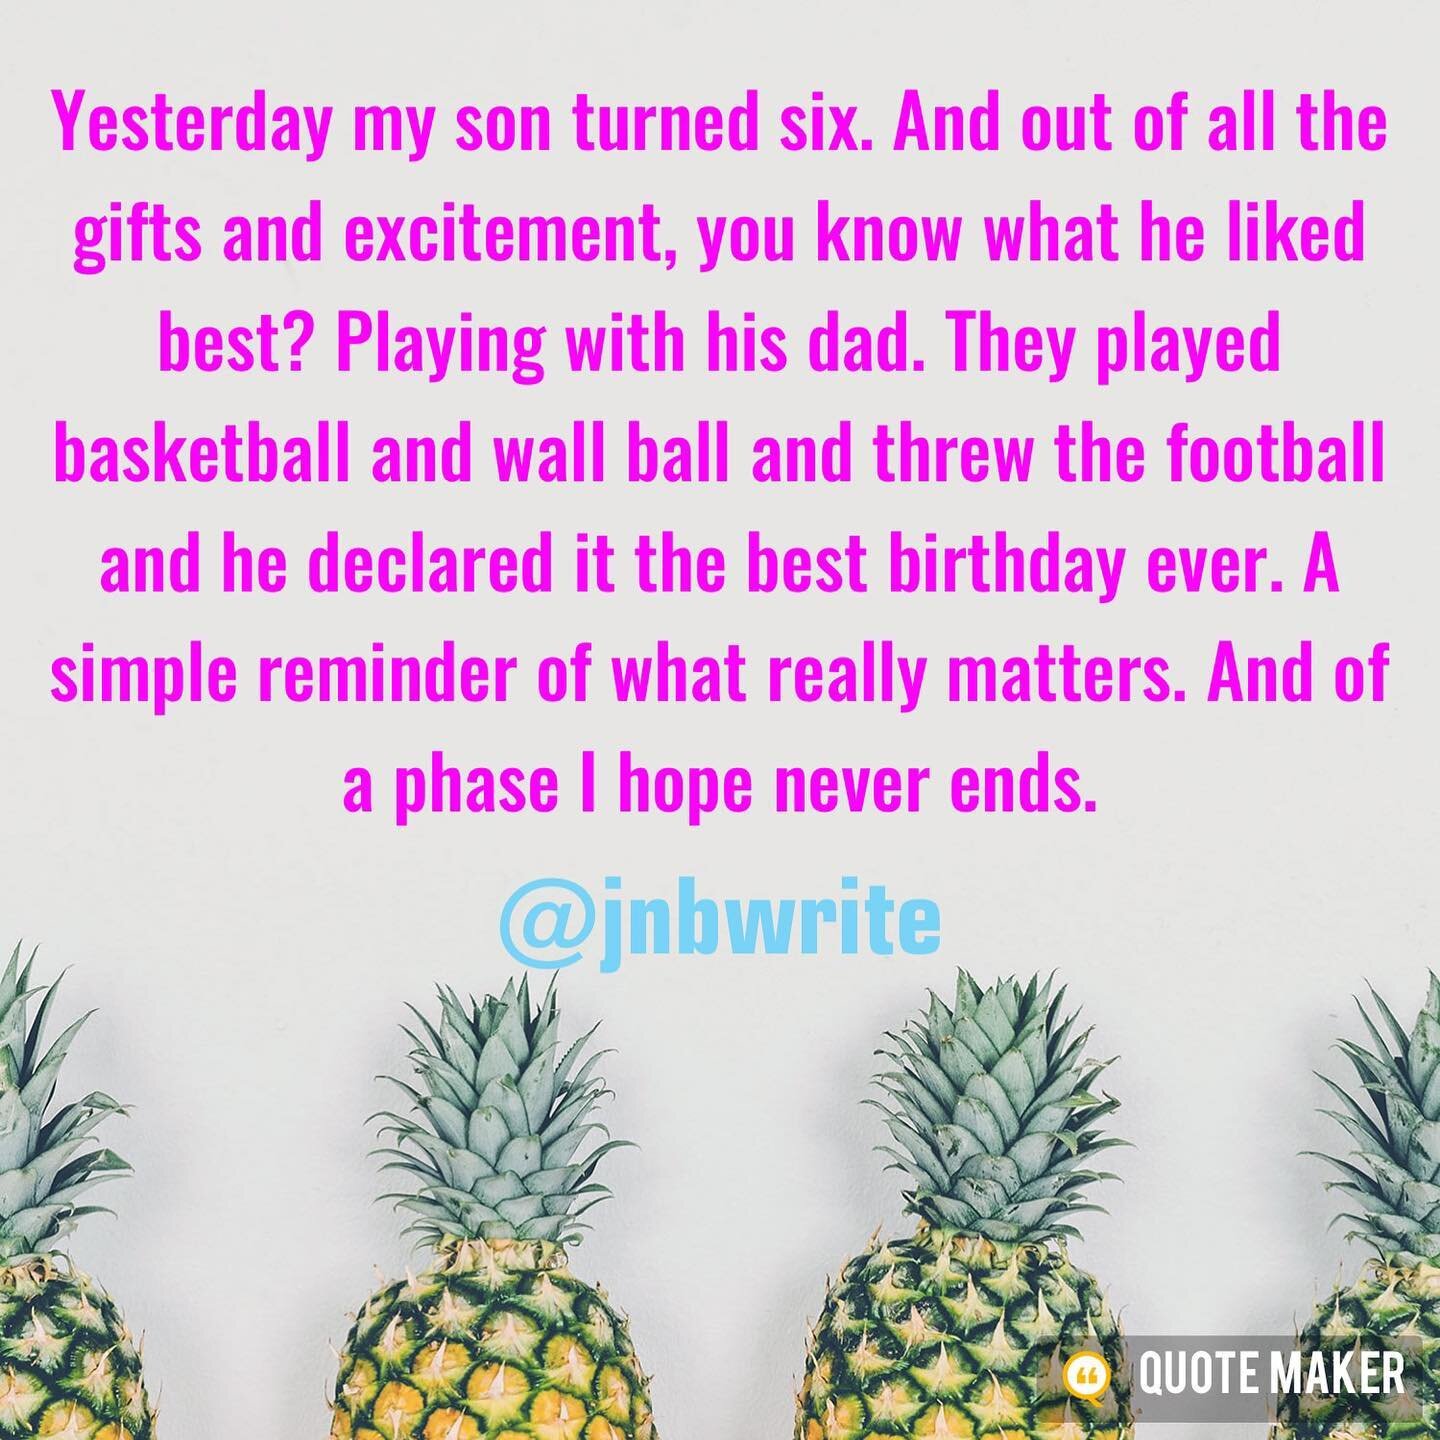 Don&rsquo;t worry, he liked the gifts too 😉 

#motherhood #momlife #realmotherhood #realmom #realmomlife #mom #momminainteasy #mommin #childhoodunplugged #motherhoodunfiltered #motherhoodunplugged #writermom #writersofinstagram #amwriting